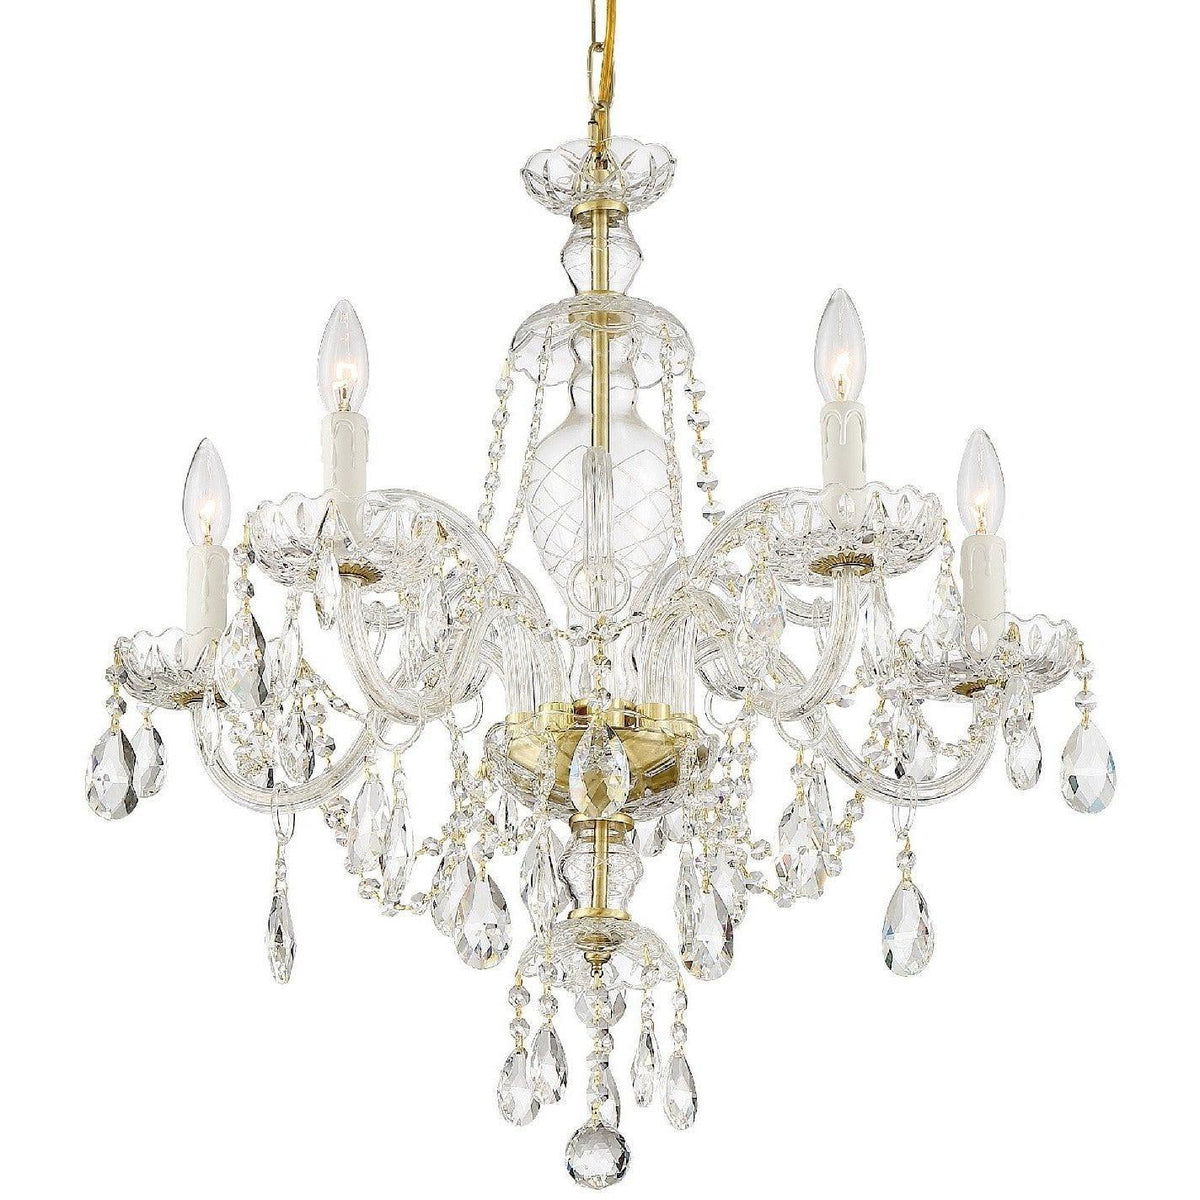 Crystorama - Candace Five Light Chandelier - CAN-A1306-PB-CL-MWP | Montreal Lighting & Hardware